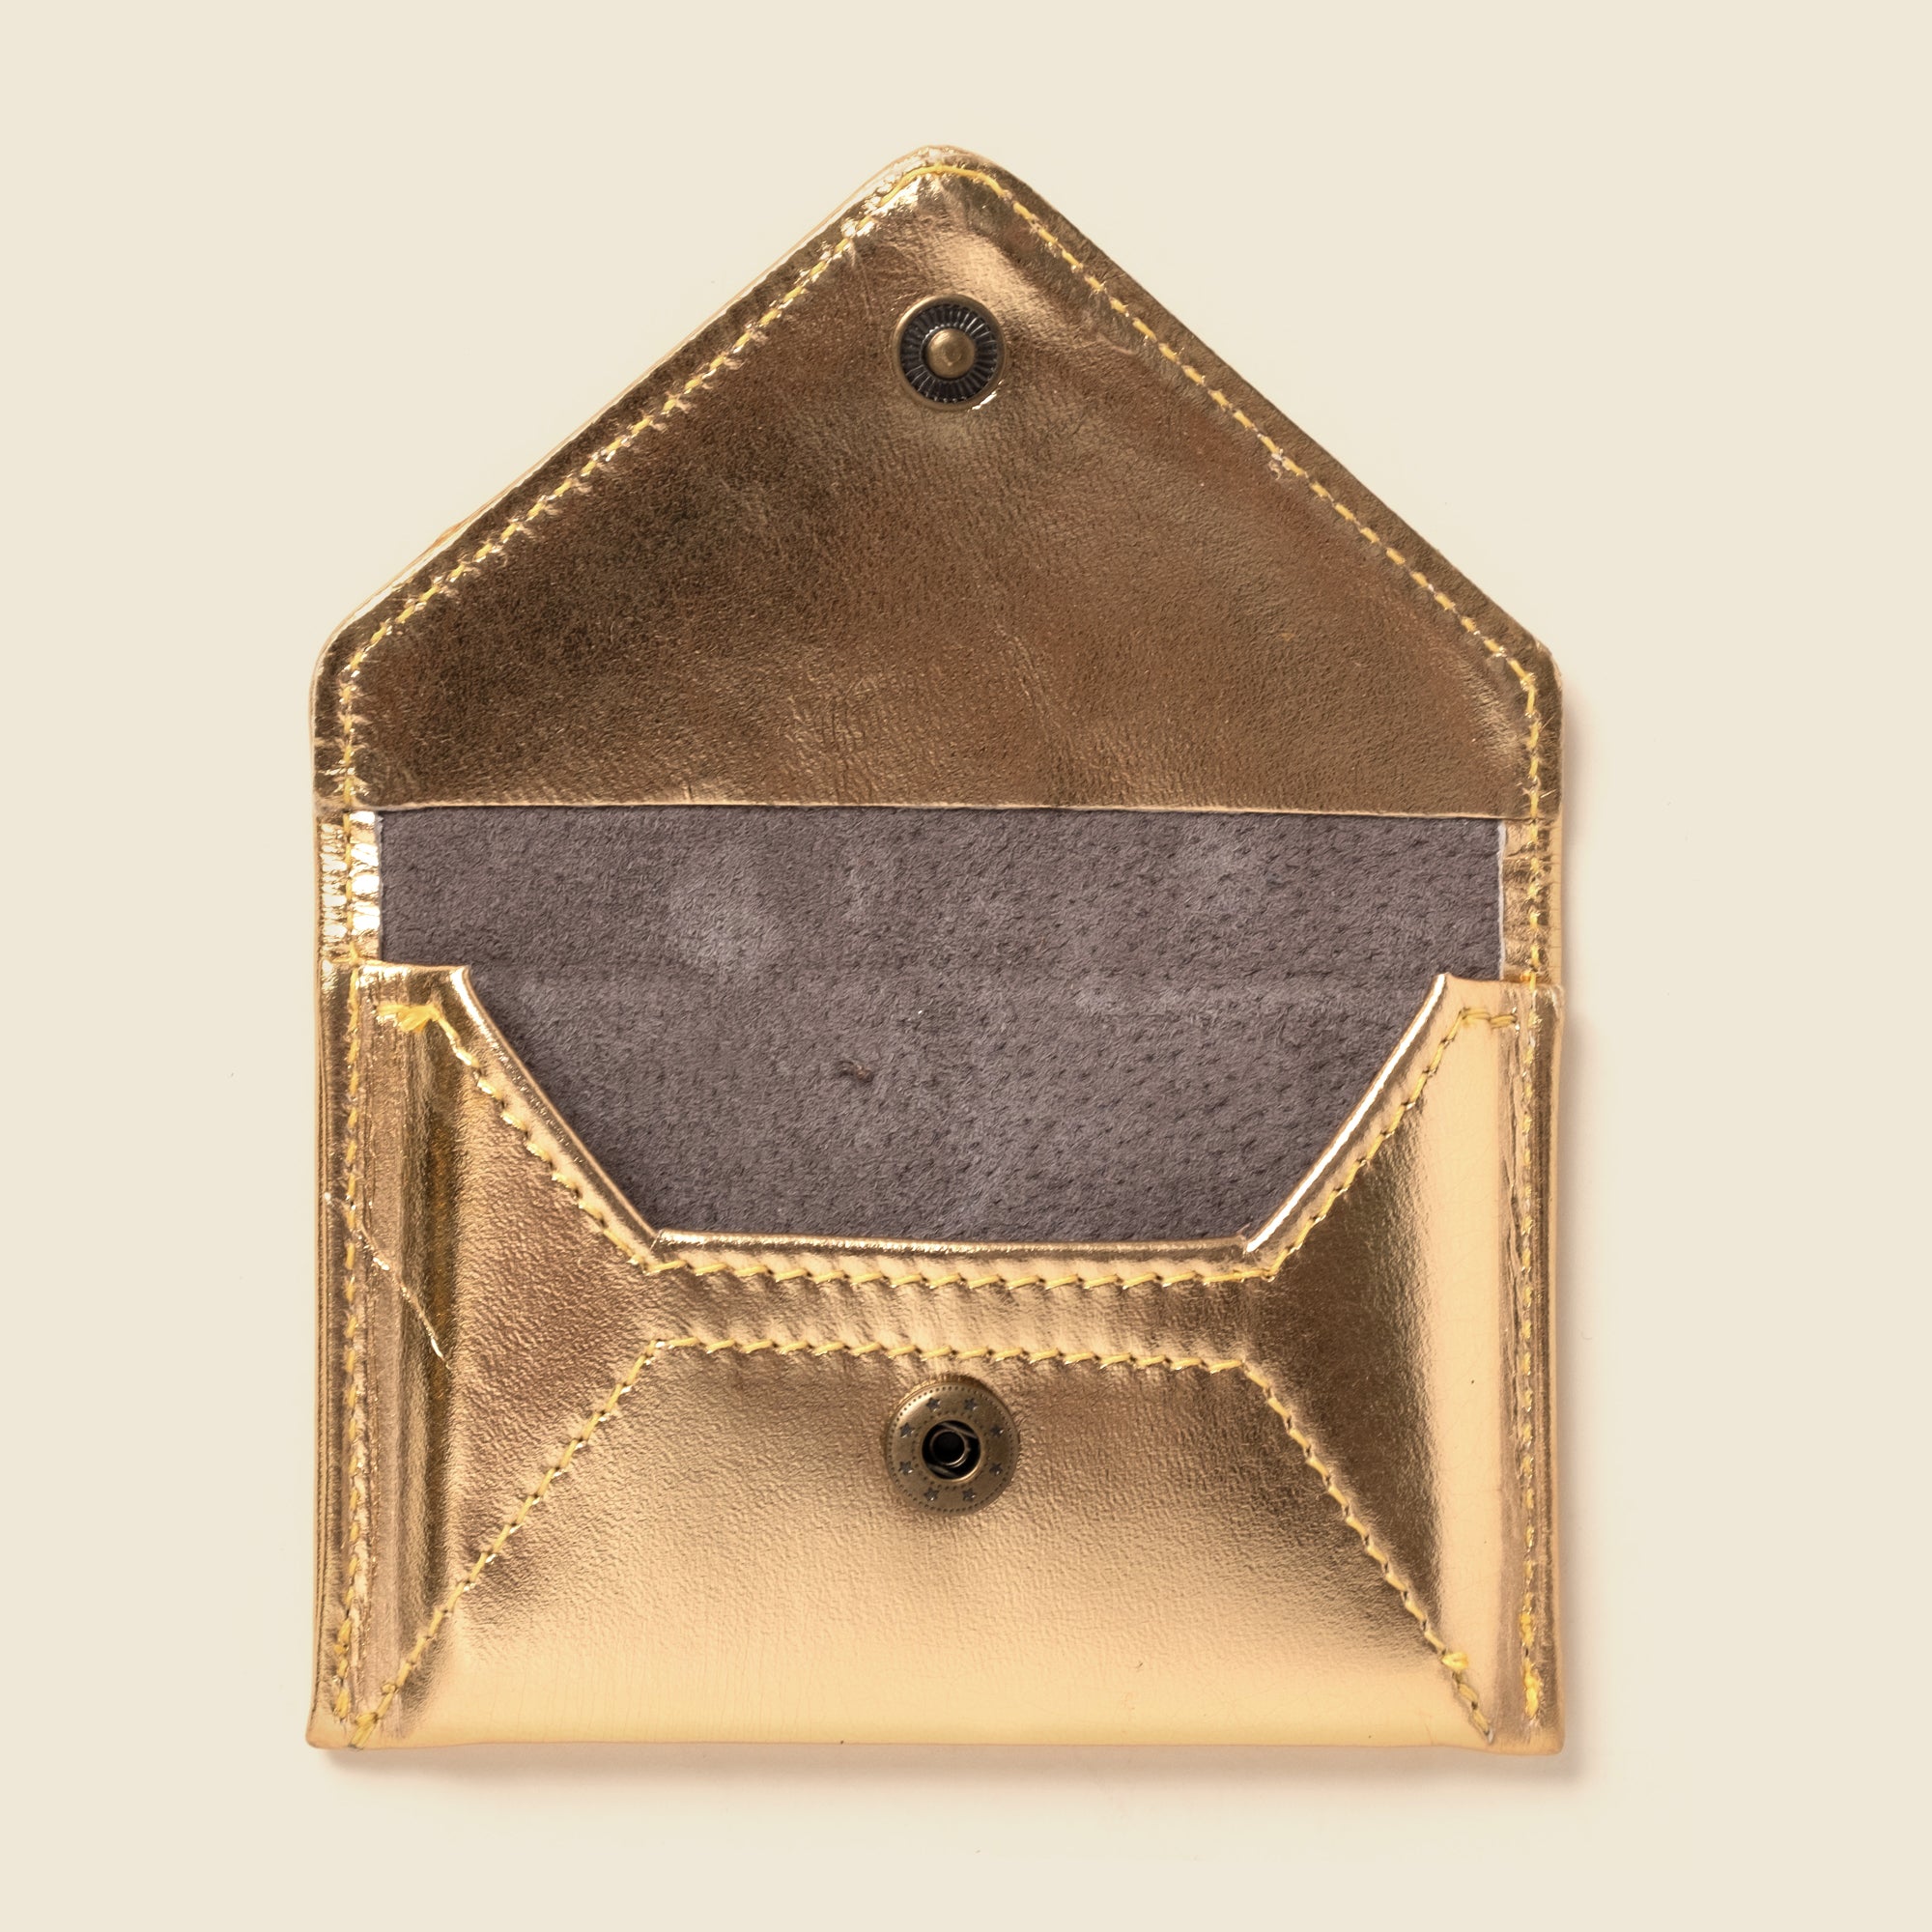 Women's Shiny gold leather envelope wallet with RFID blocking